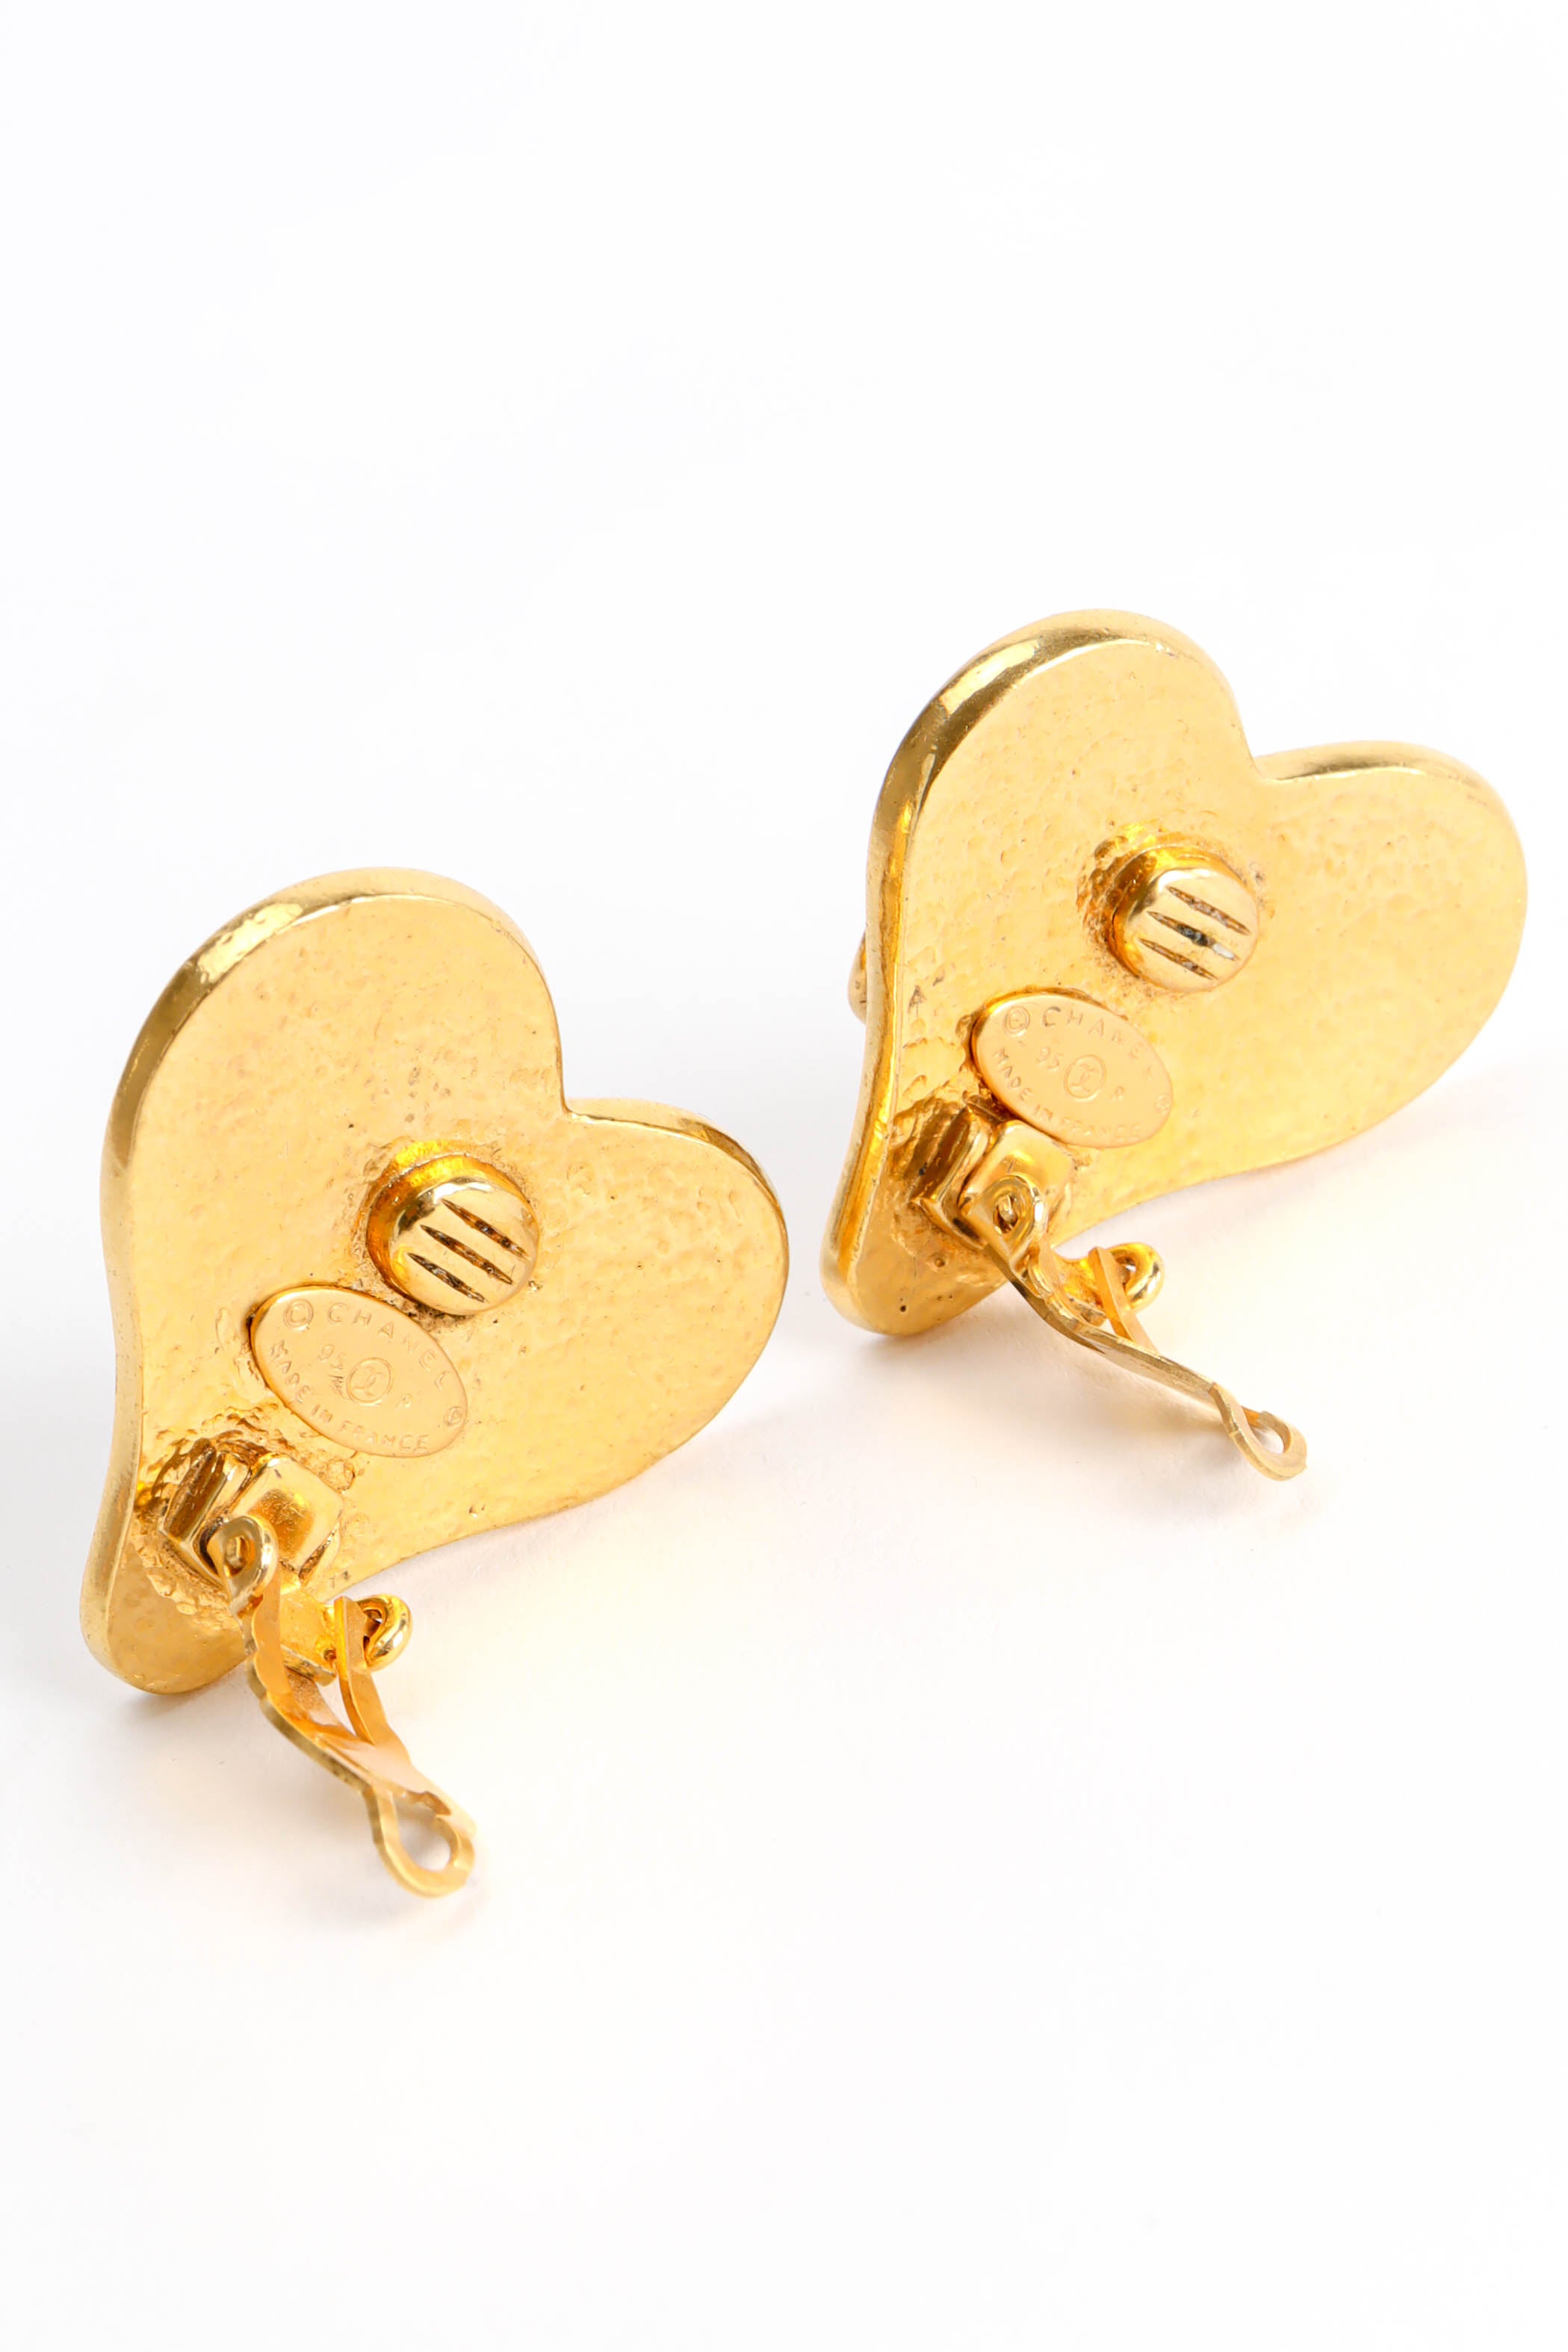 Vintage Chanel Love CC Pearl Earrings clip on open @ Recess Los Angeles